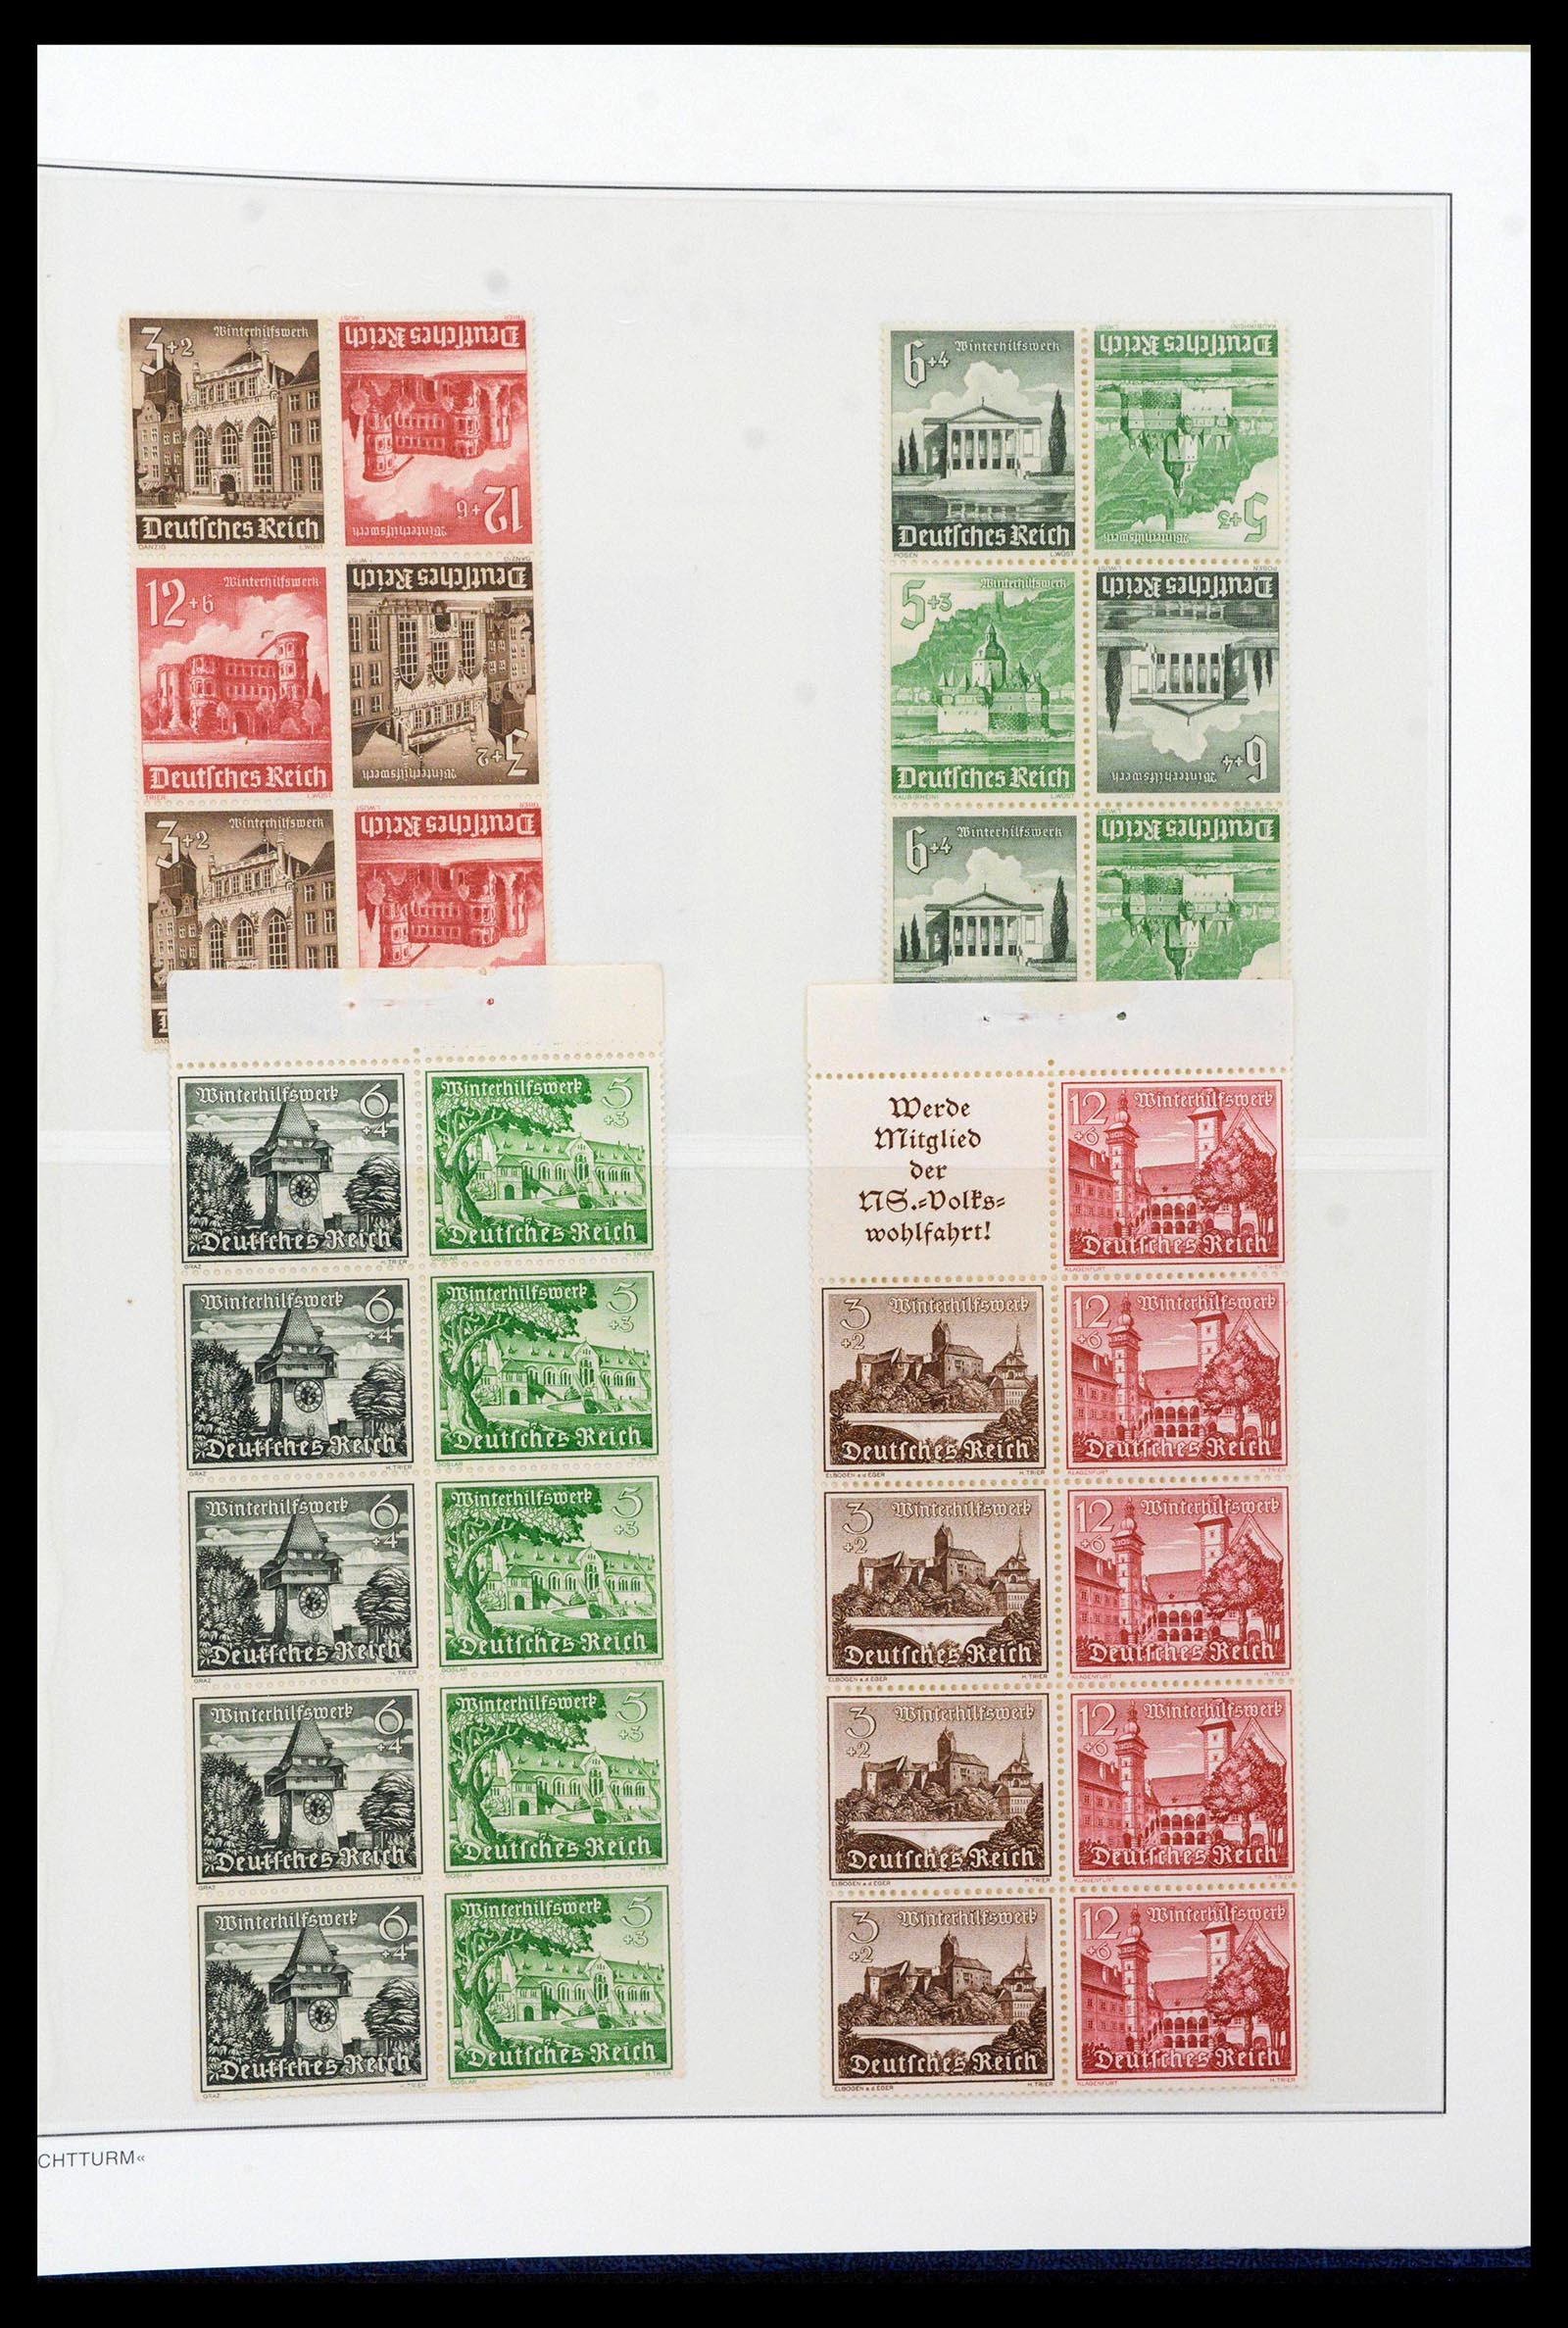 39045 0081 - Stamp collection 39045 German Reich combinations 1913-1941.